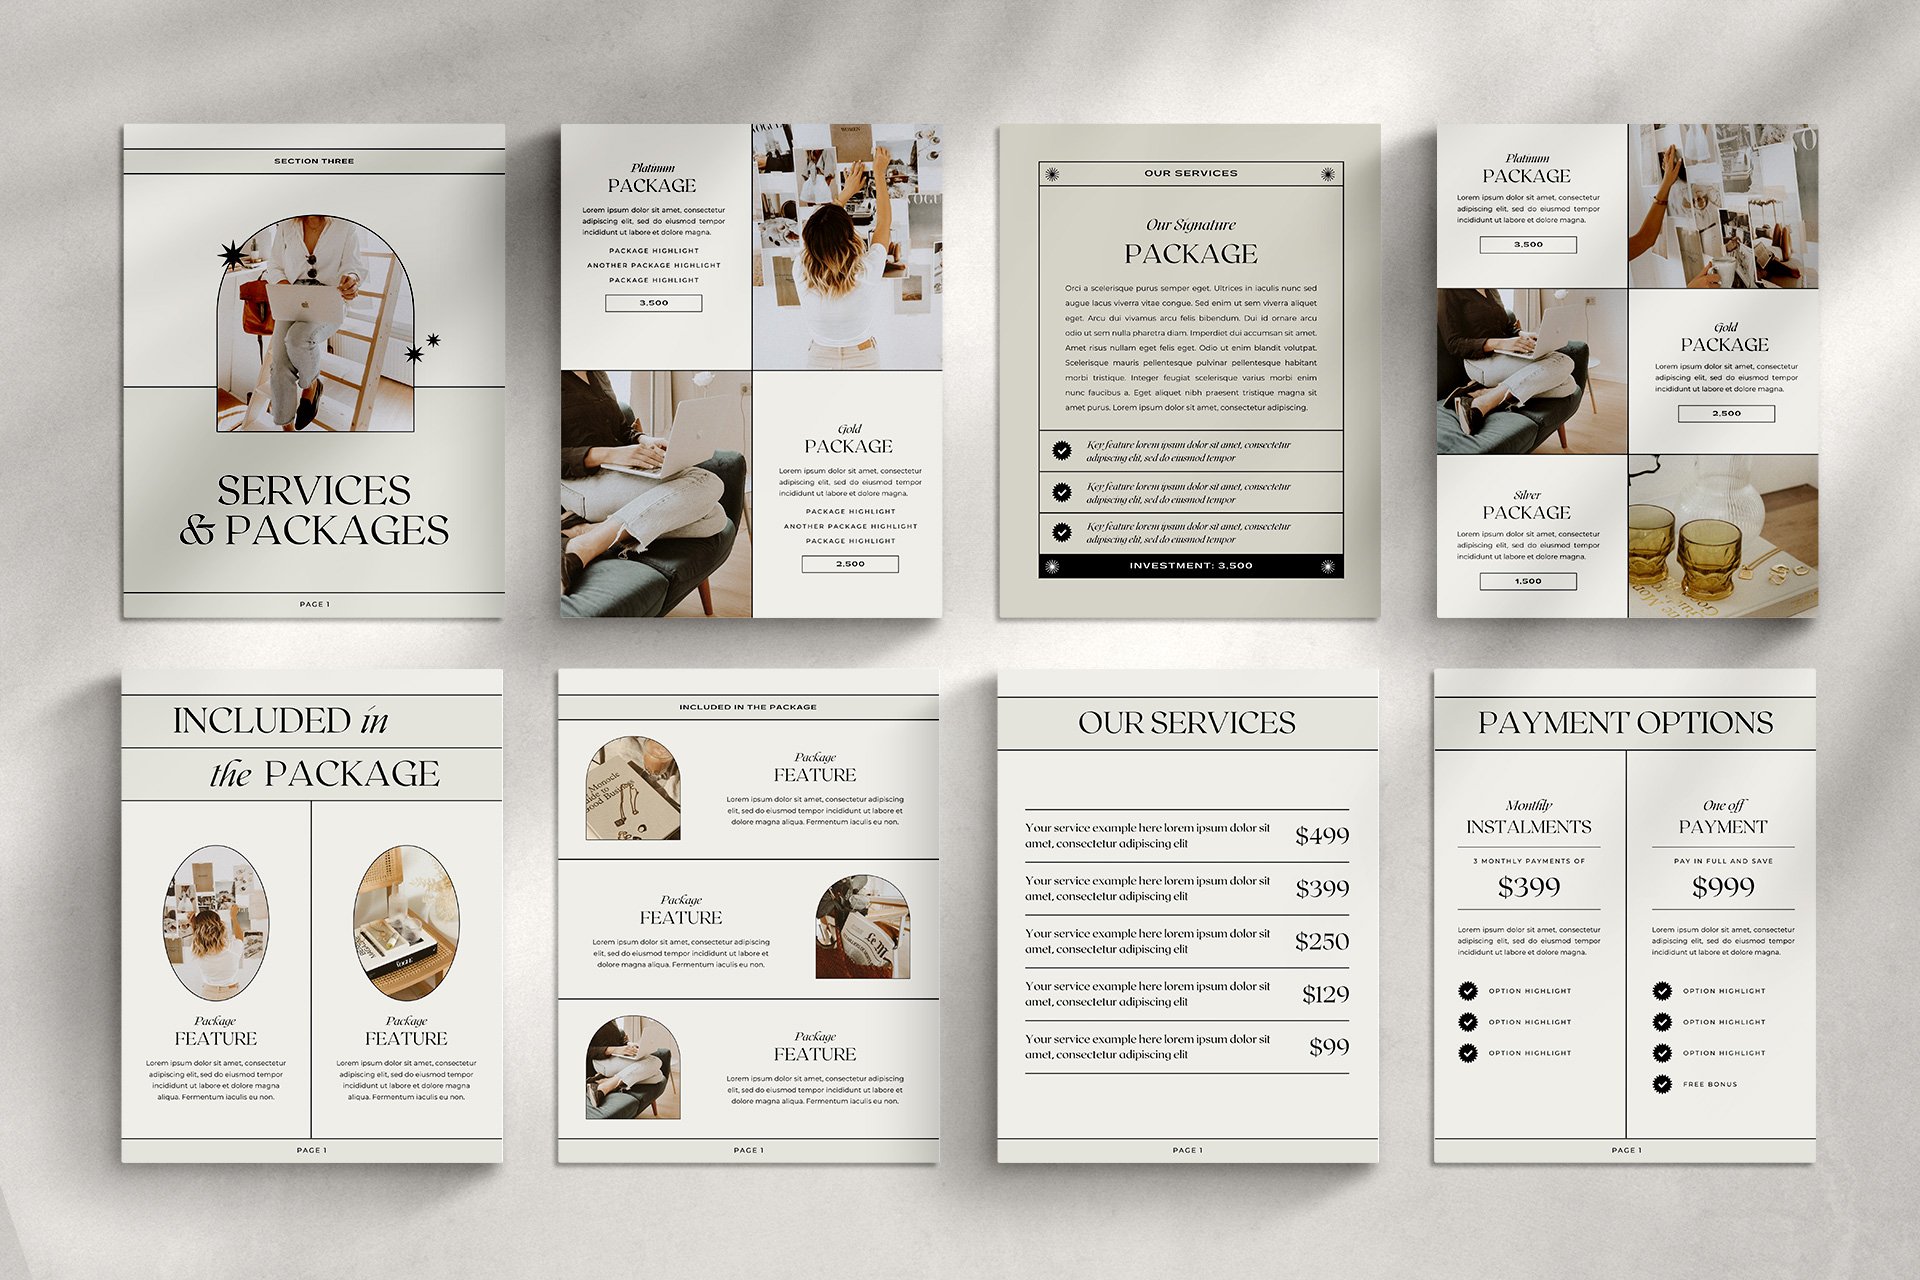 10 services and pricing guide price menu magazine ebook guide business photography canva template aestjetic 458